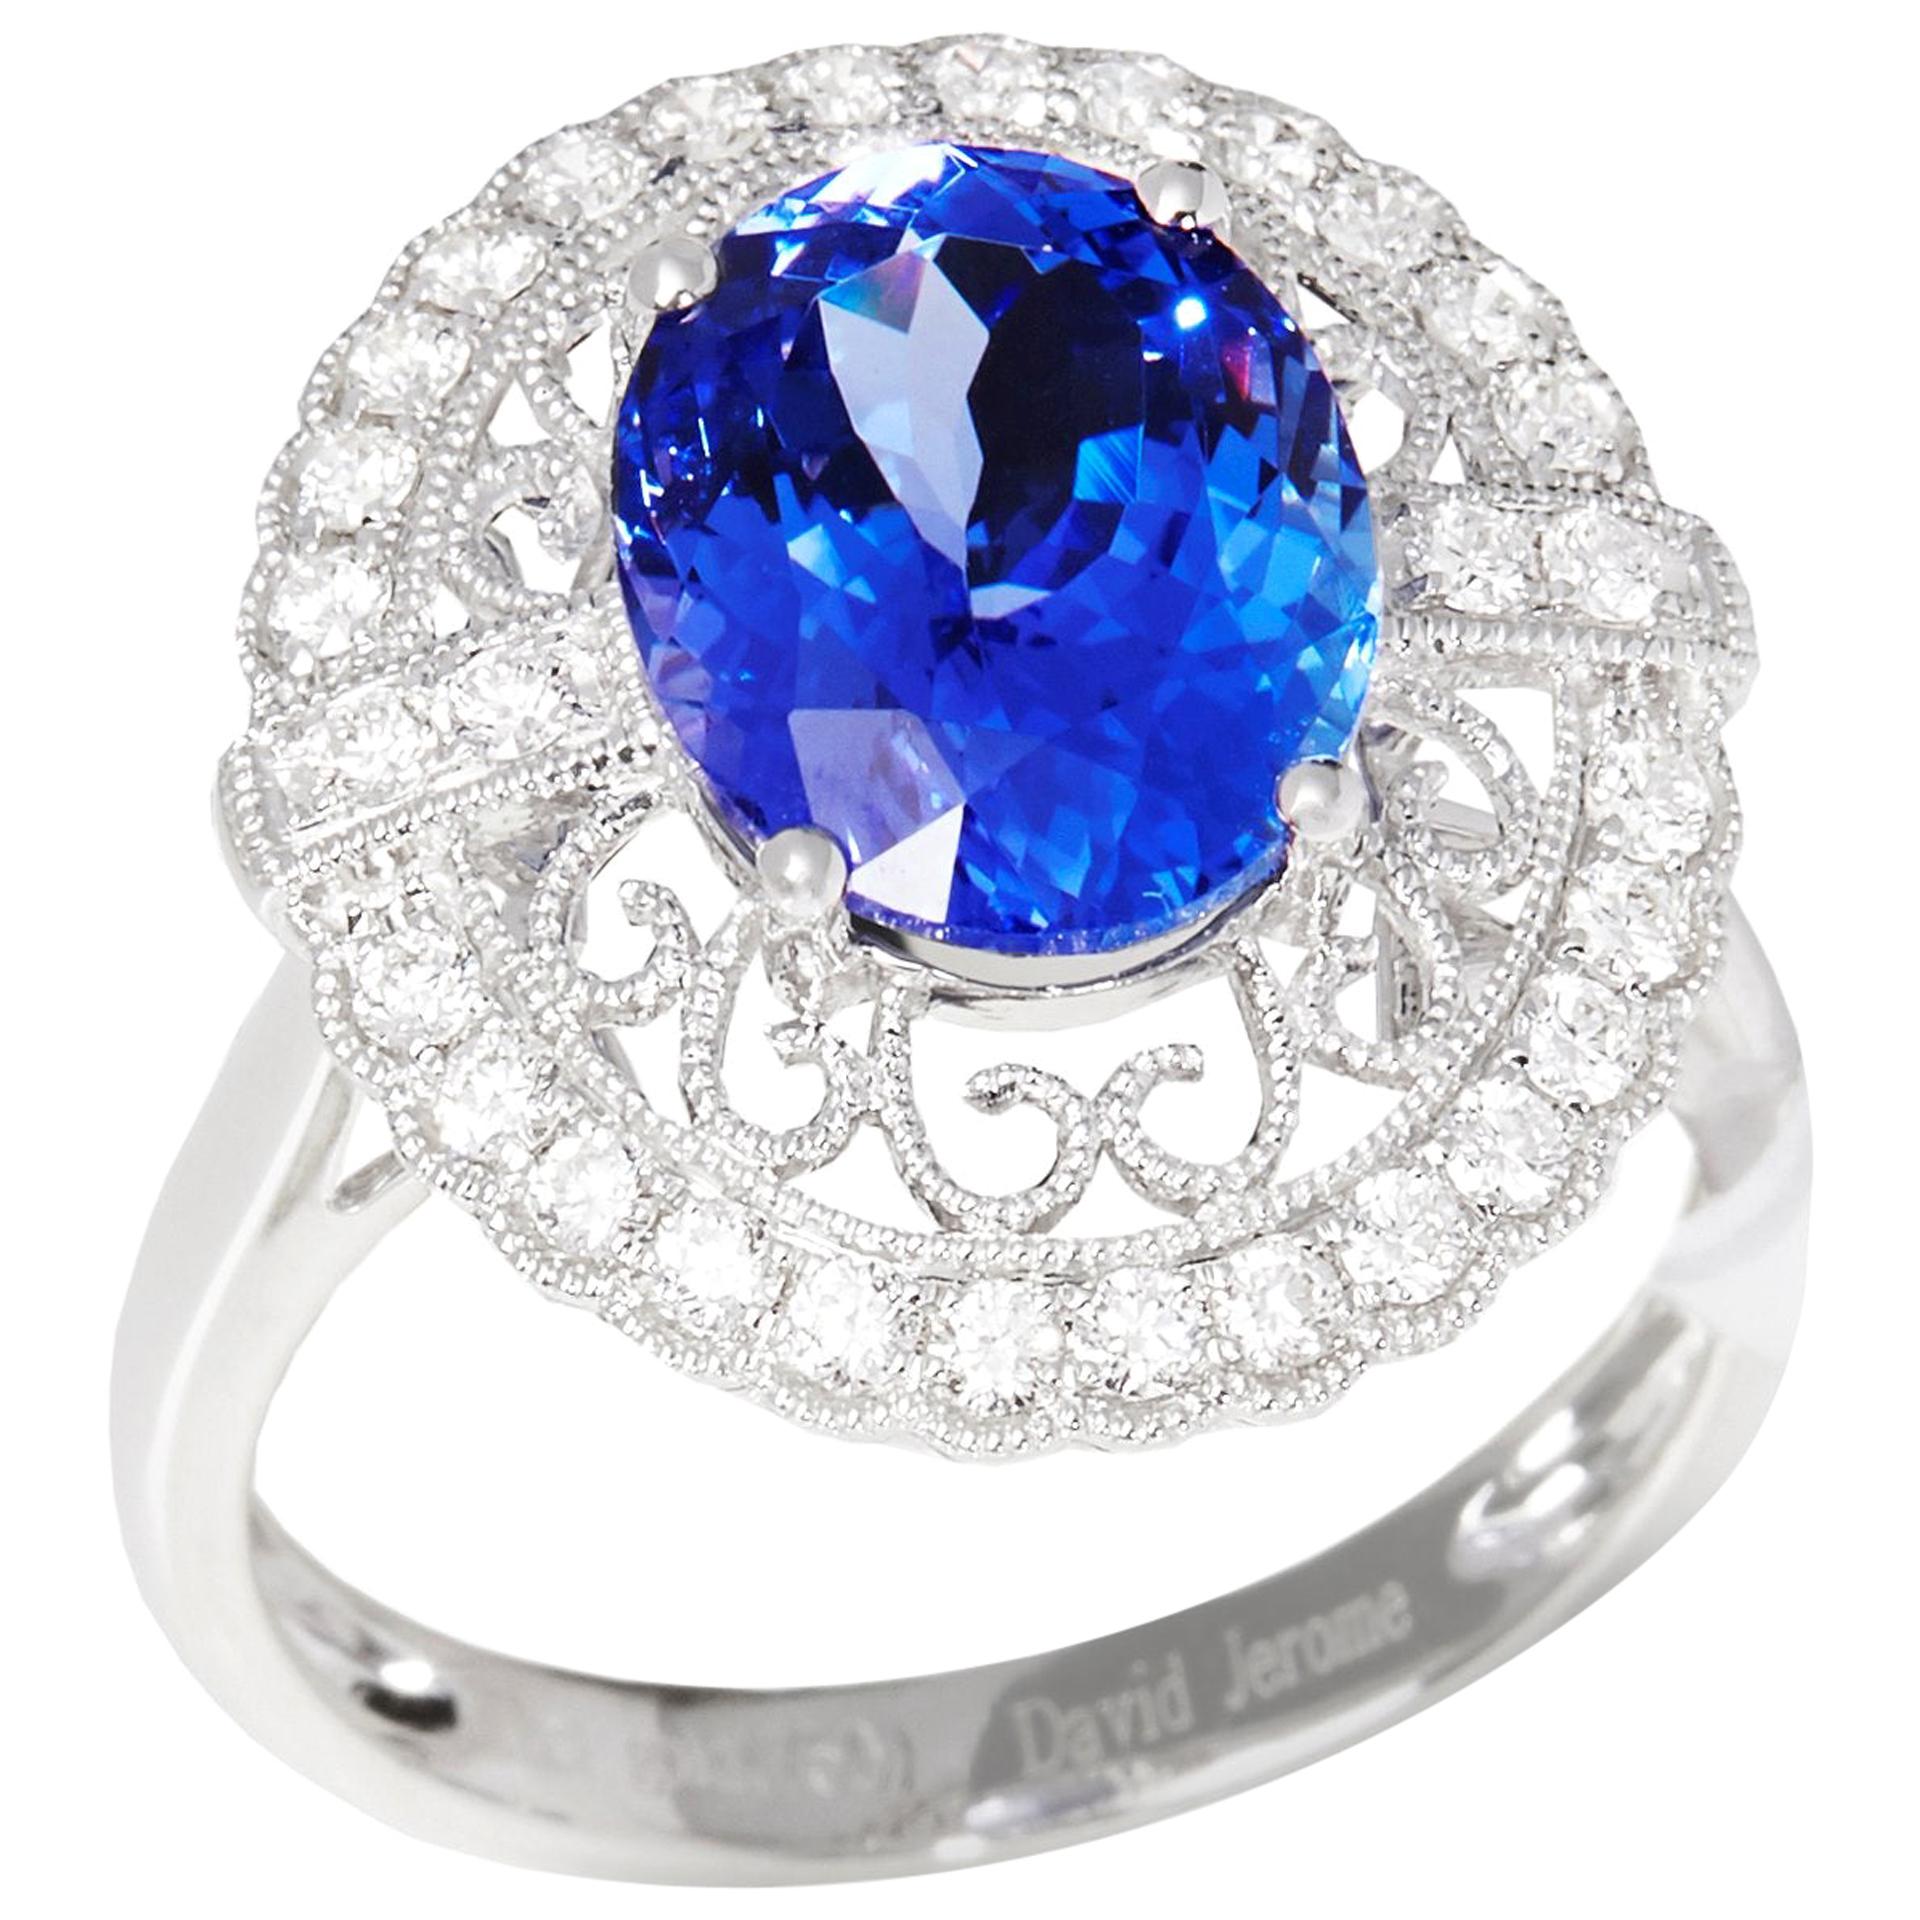 Certified 3.96ct Oval Cut Tanzanite and Diamond 18ct gold RIng